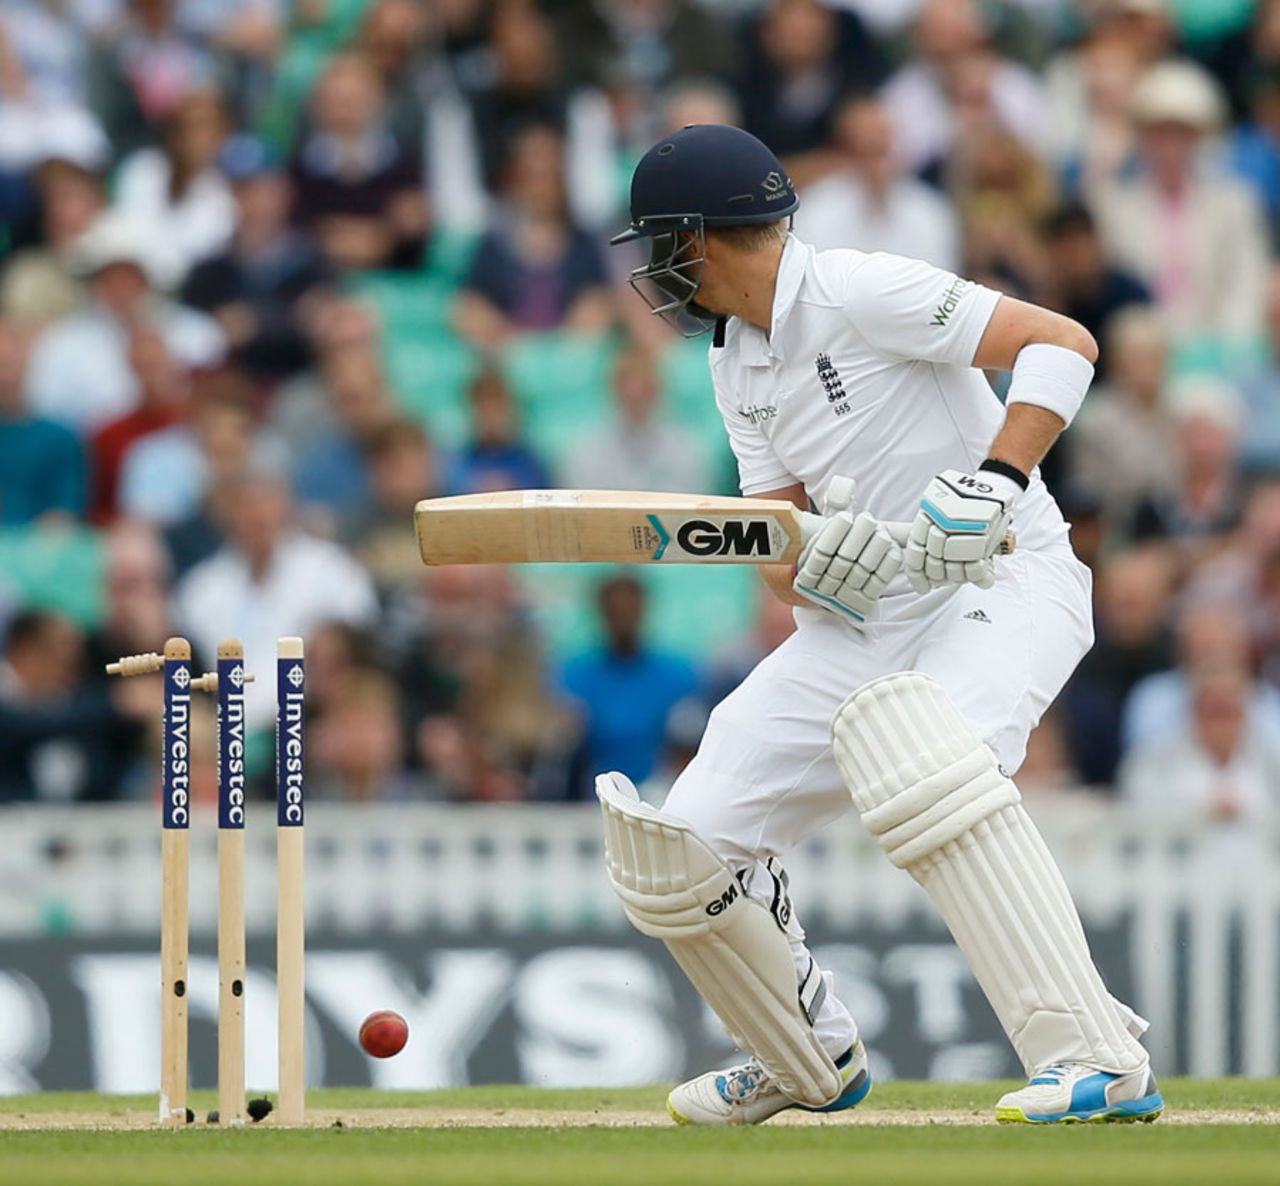 Joe Root was bowled off a no-ball, England v India, 5th Investec Test, The Oval, 3rd day, August 17, 2014